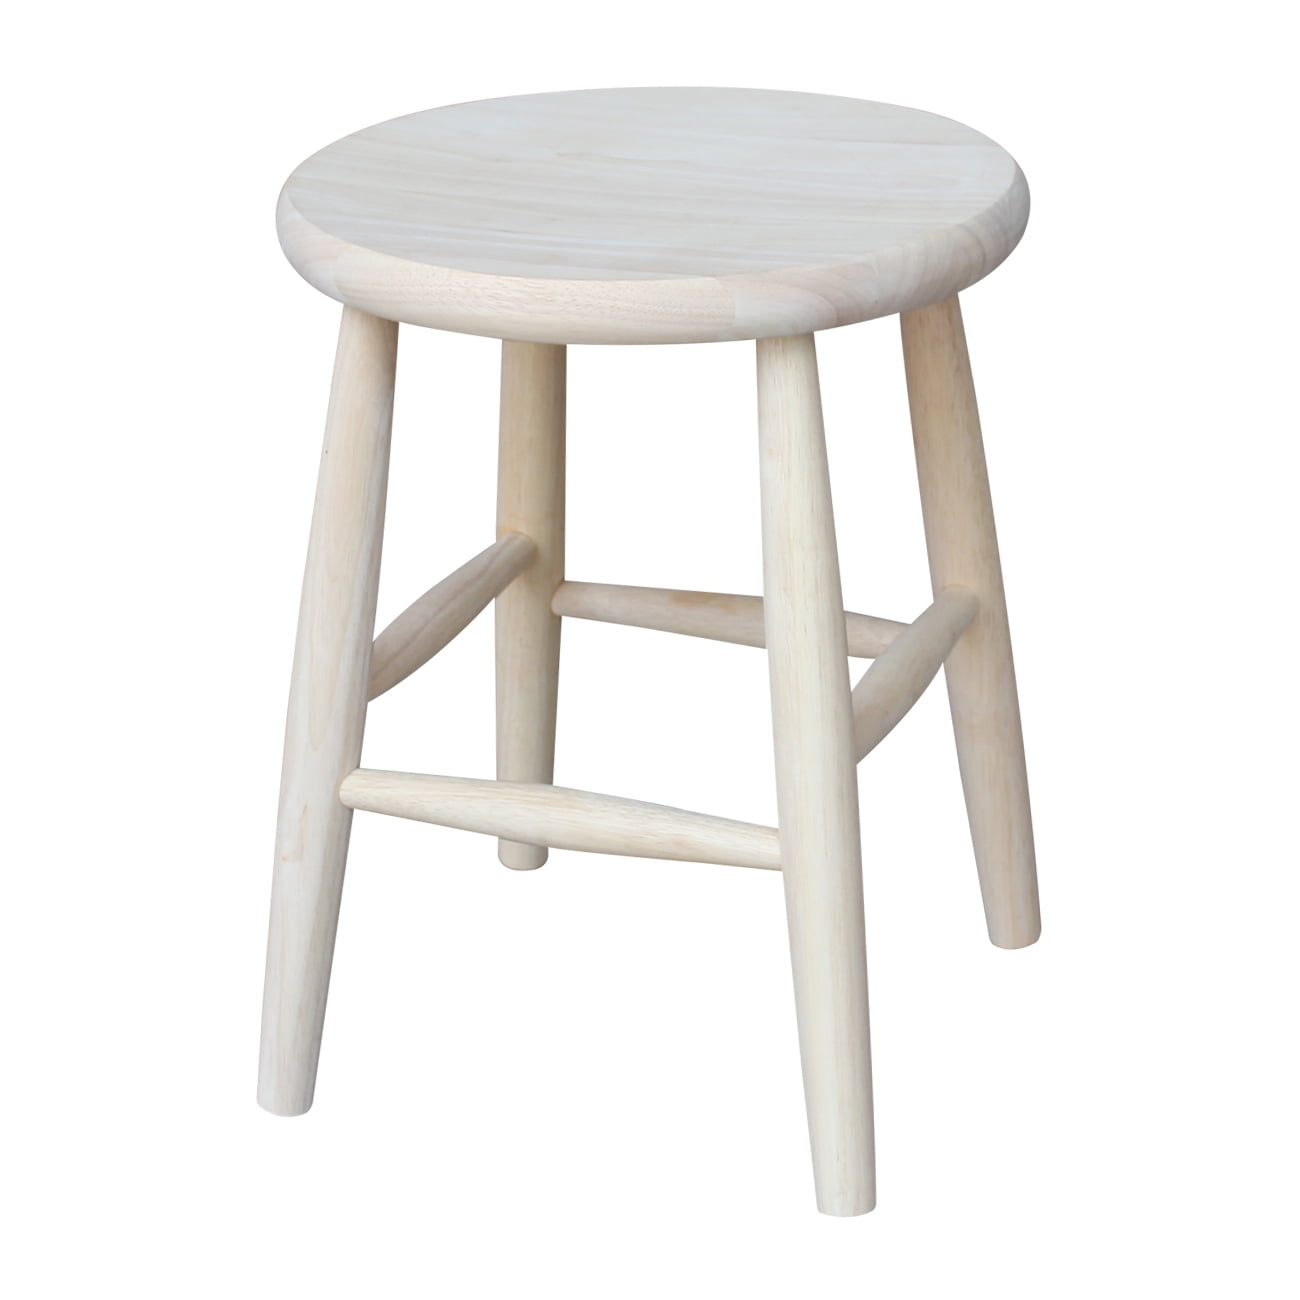 Scooped Seat Stool 18 Height, Bar Stools 18 Inch Height